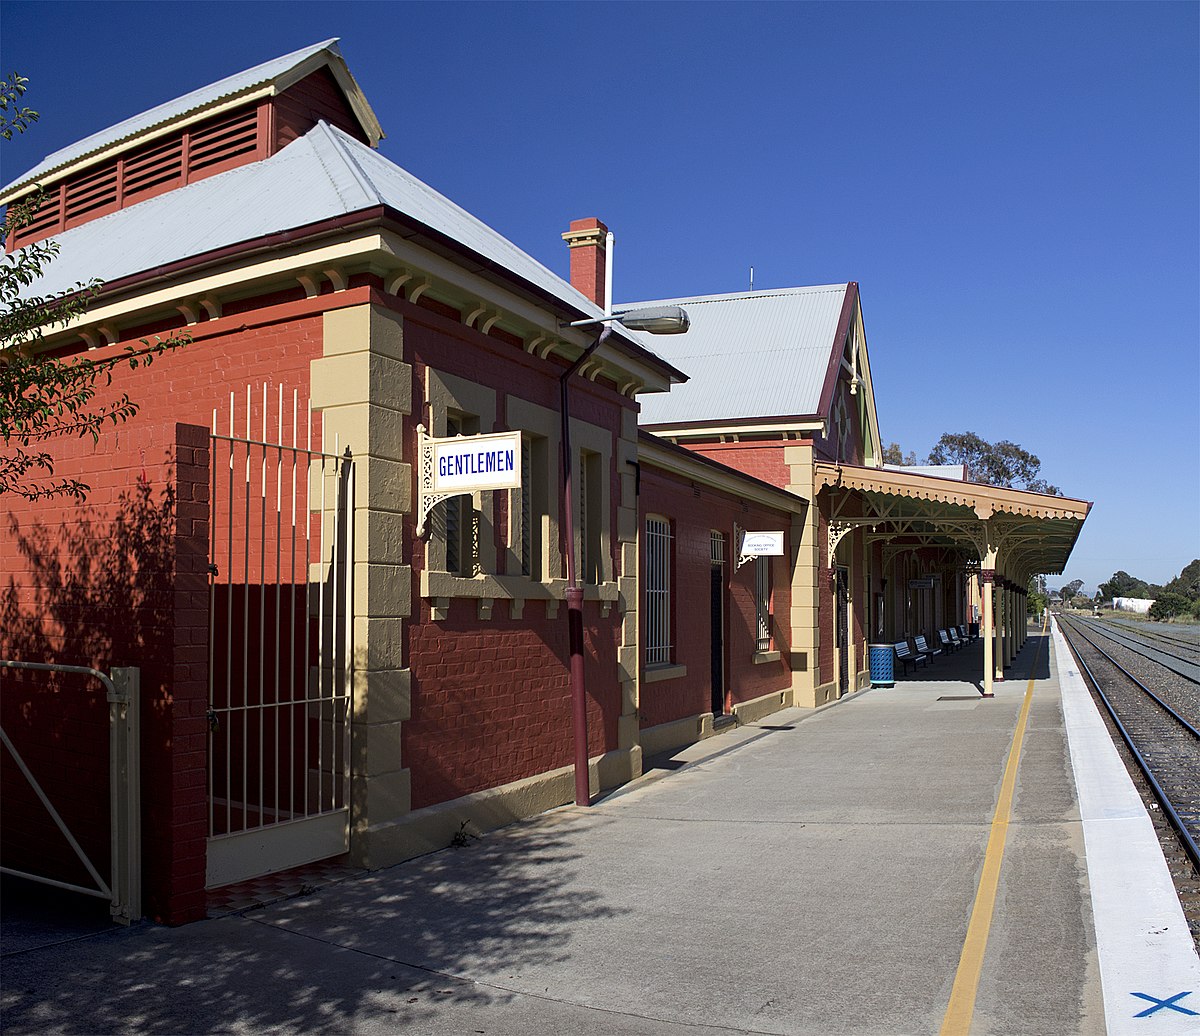 Accessibility upgrade concept design for Queanbeyan Railway Station placed on public exhibition